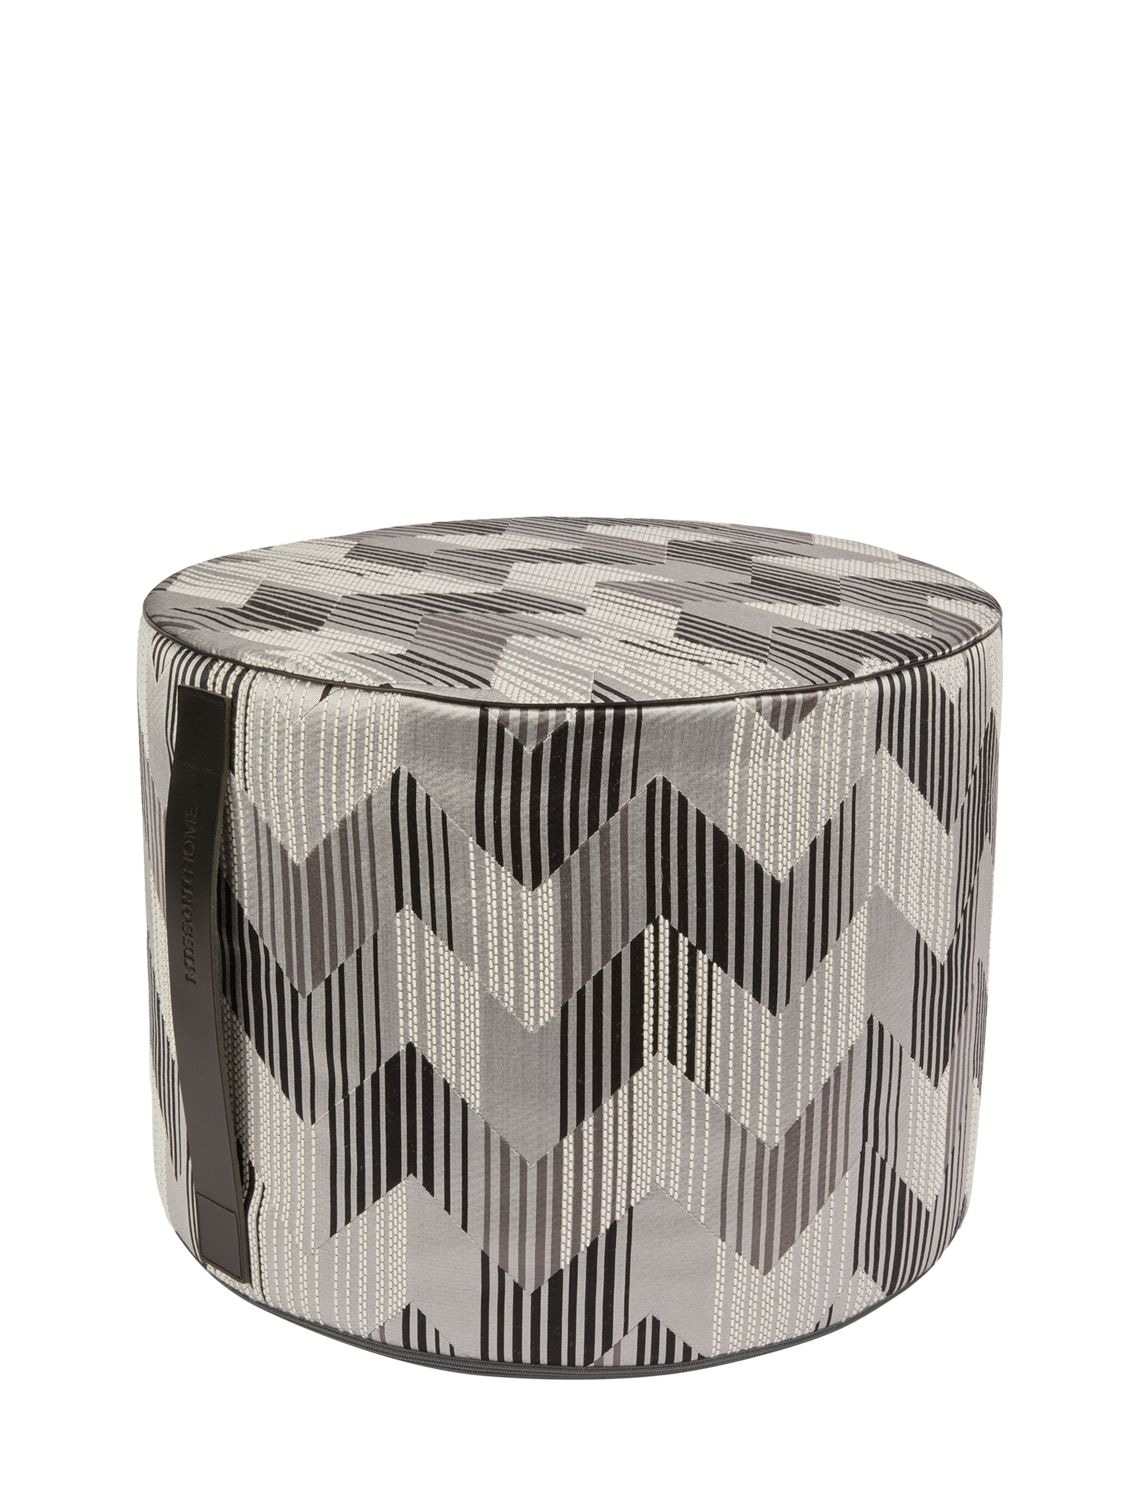 Missoni Home Collection Betulla Cylindrical Pouf In Black,white